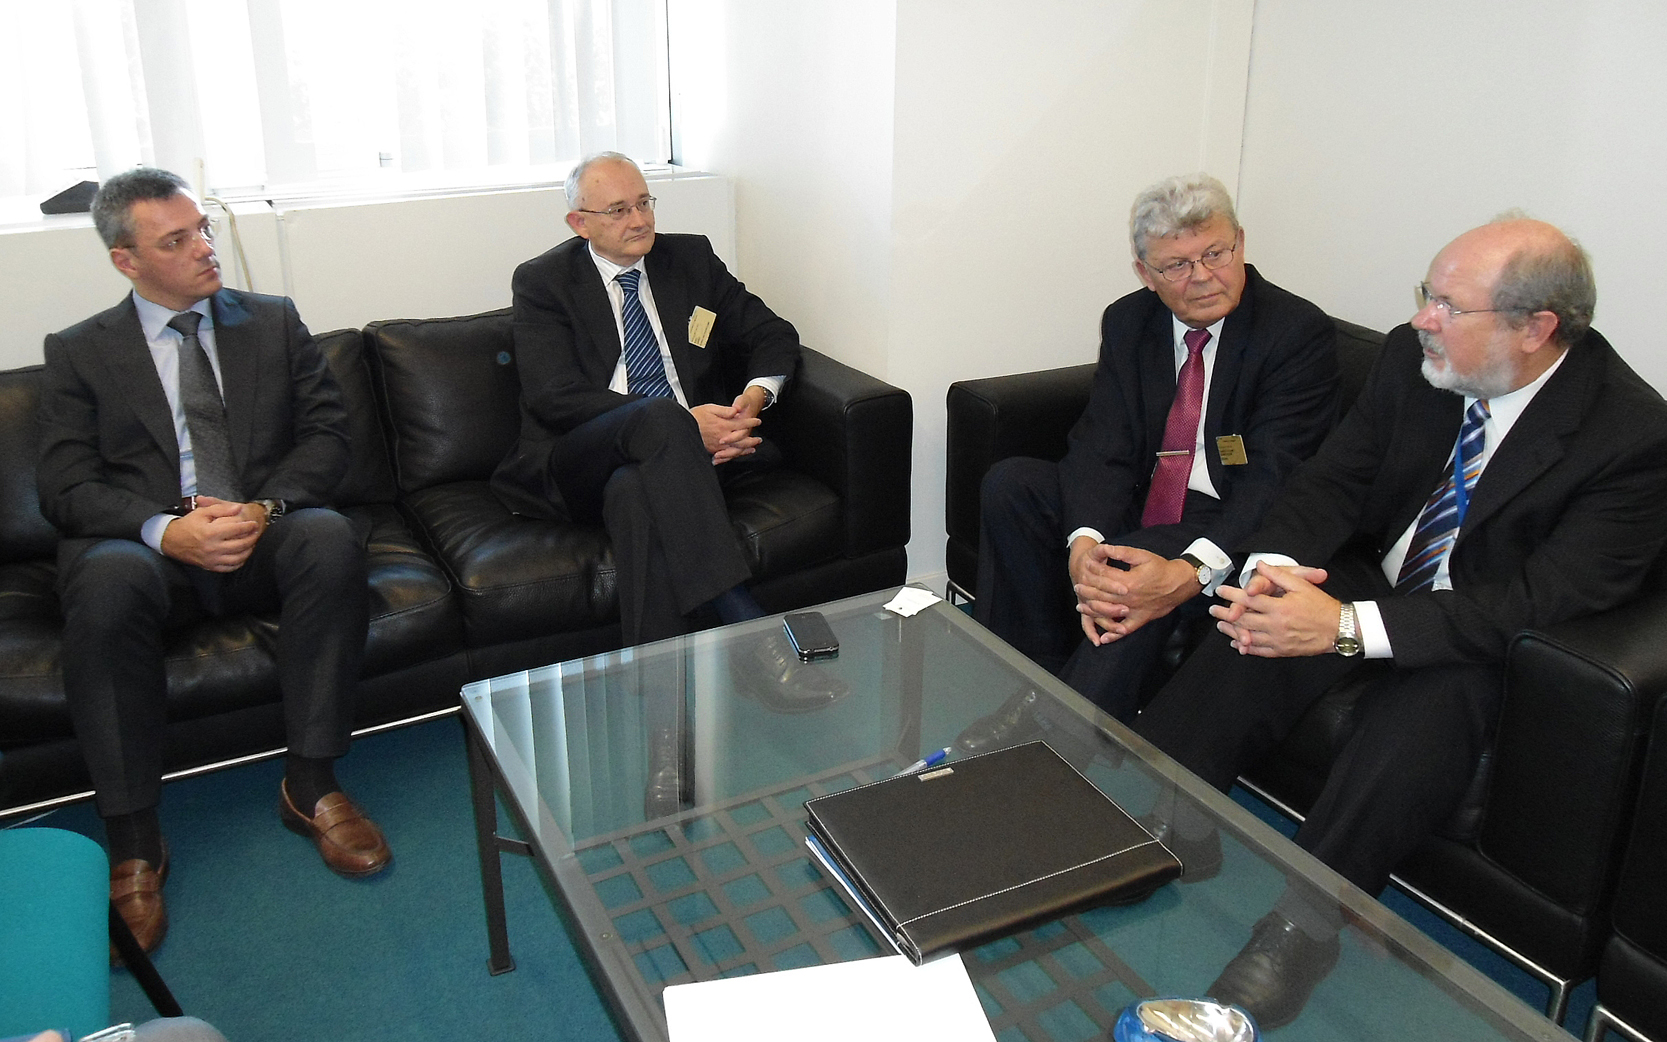 The Speaker of House of Representatives of the Parliamentary Assembly of BiH, Božo Ljubić, and Deputy Speaker of the House of Peoples the Parliamentary Assembly of BiH, Ognjen Tadić, meet the Deputy Speaker of Lithuanian Seym

